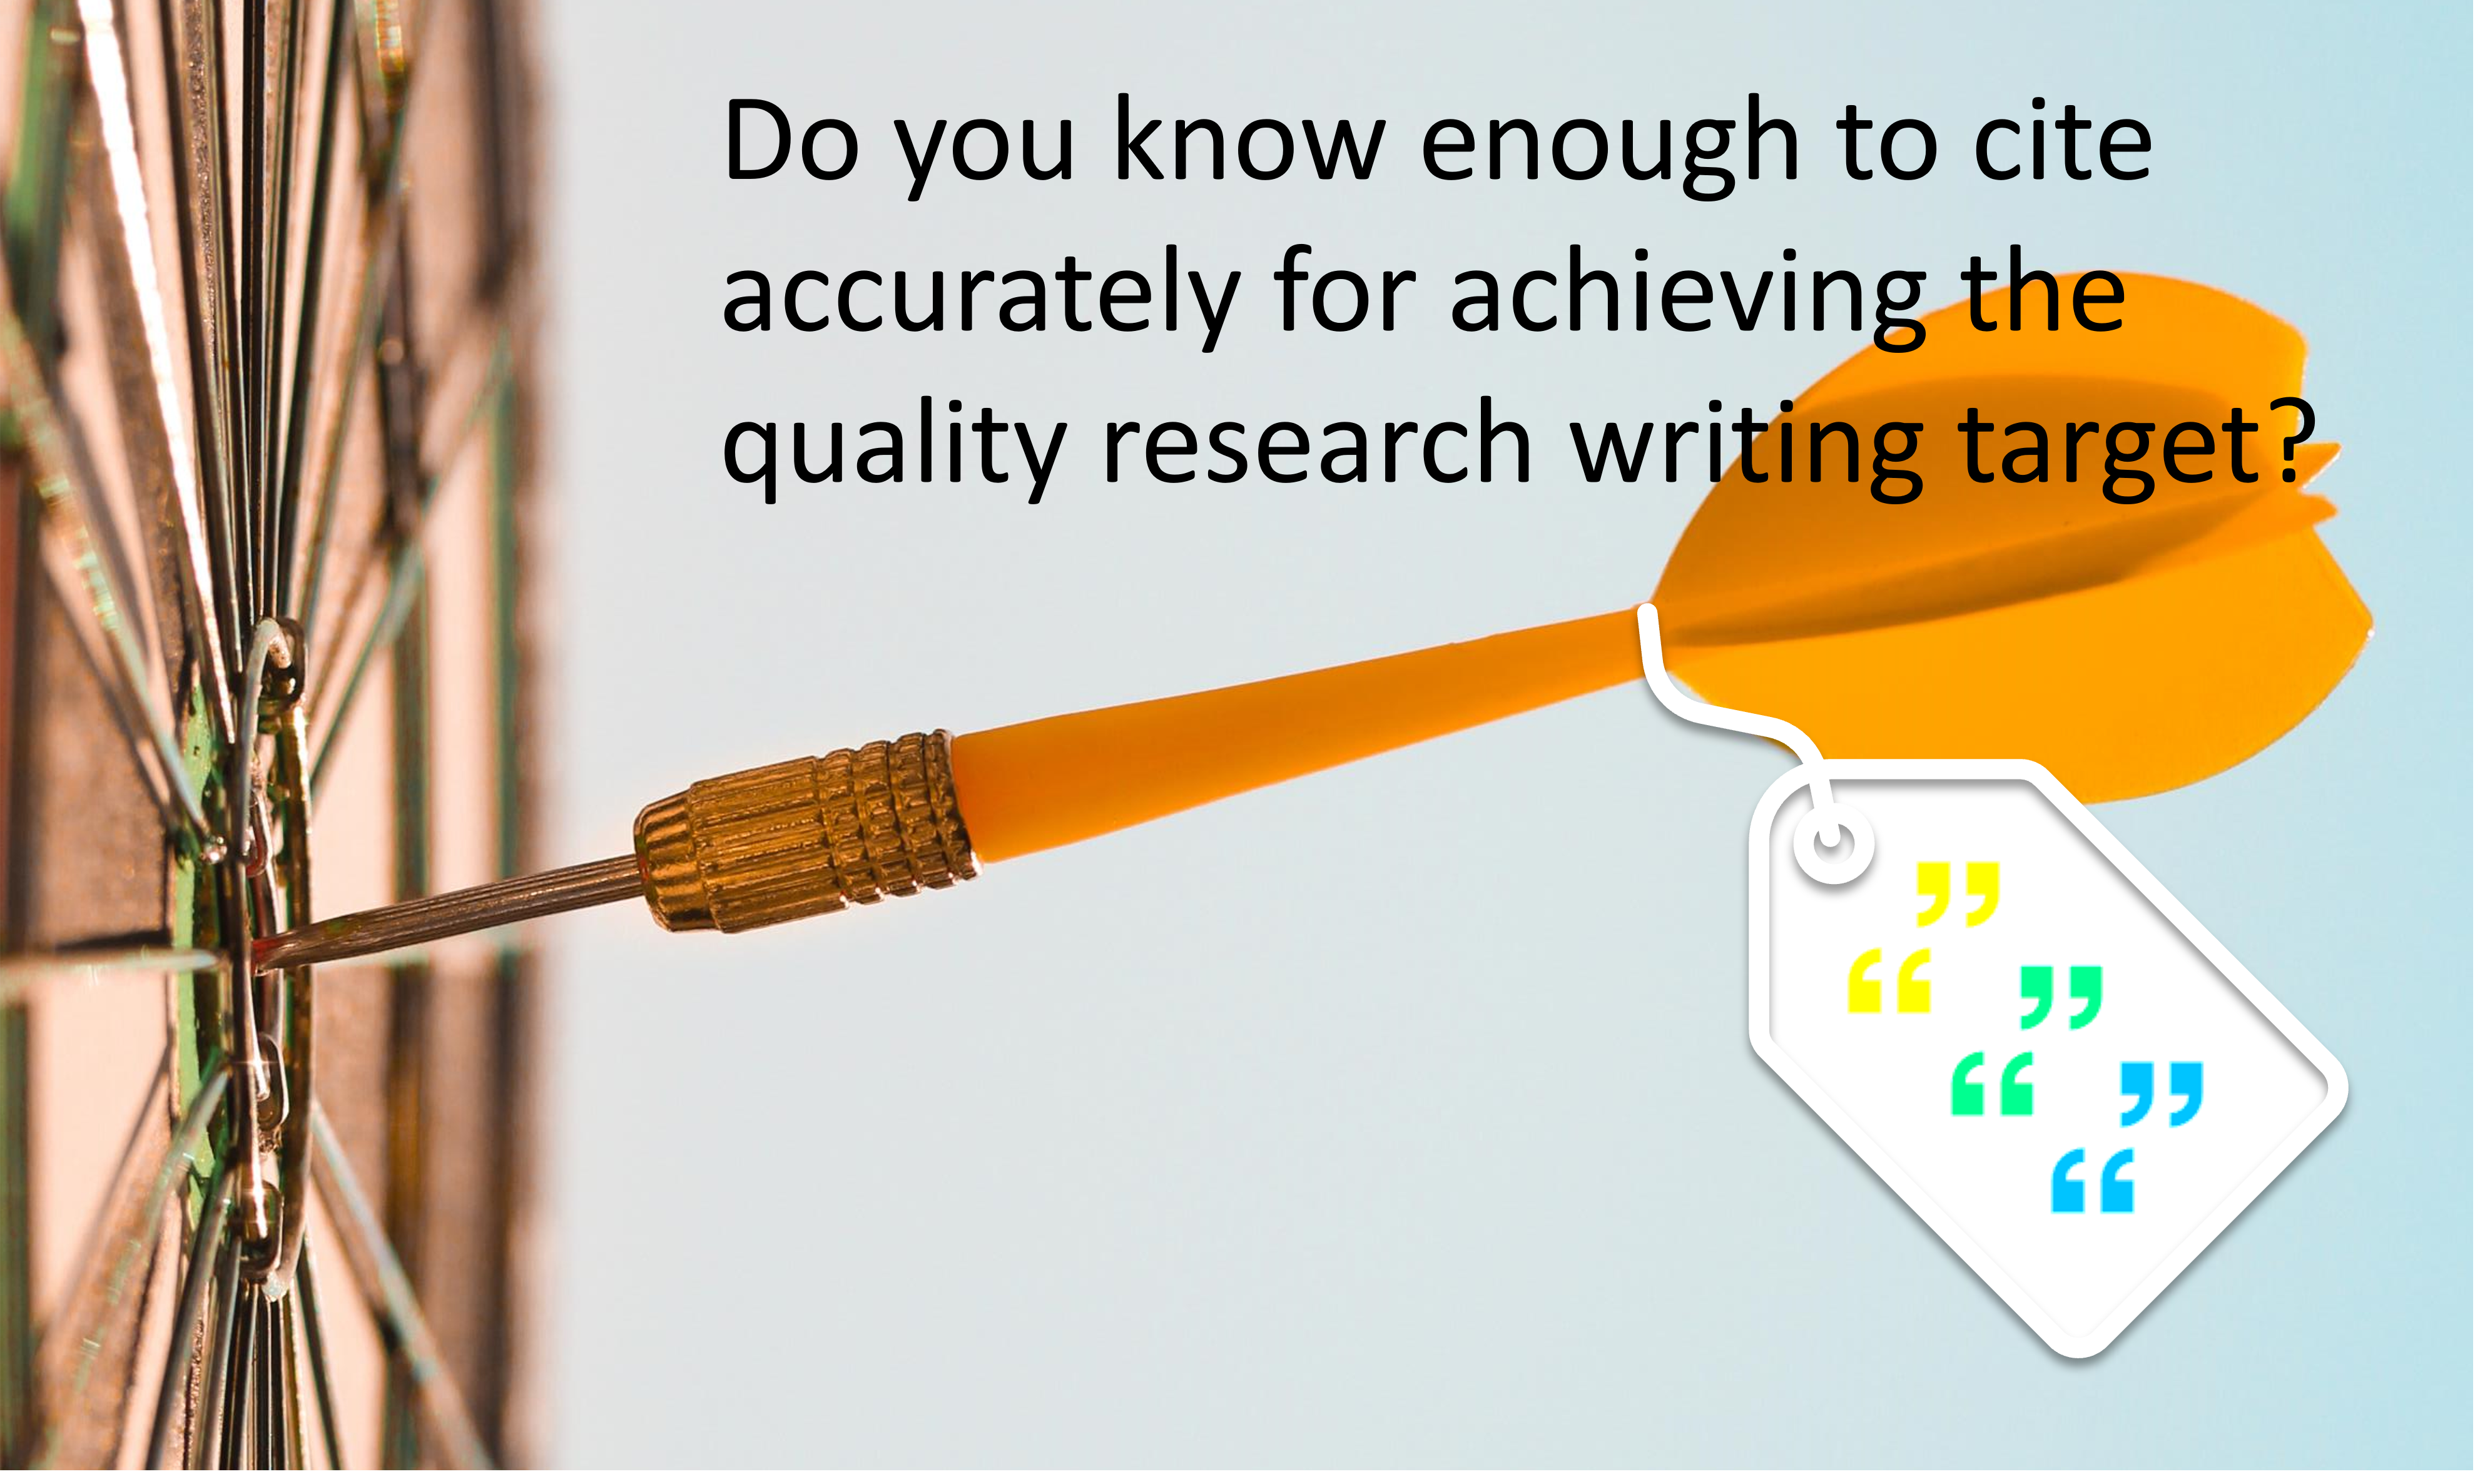 accurate citation for achieving quality scientific writing